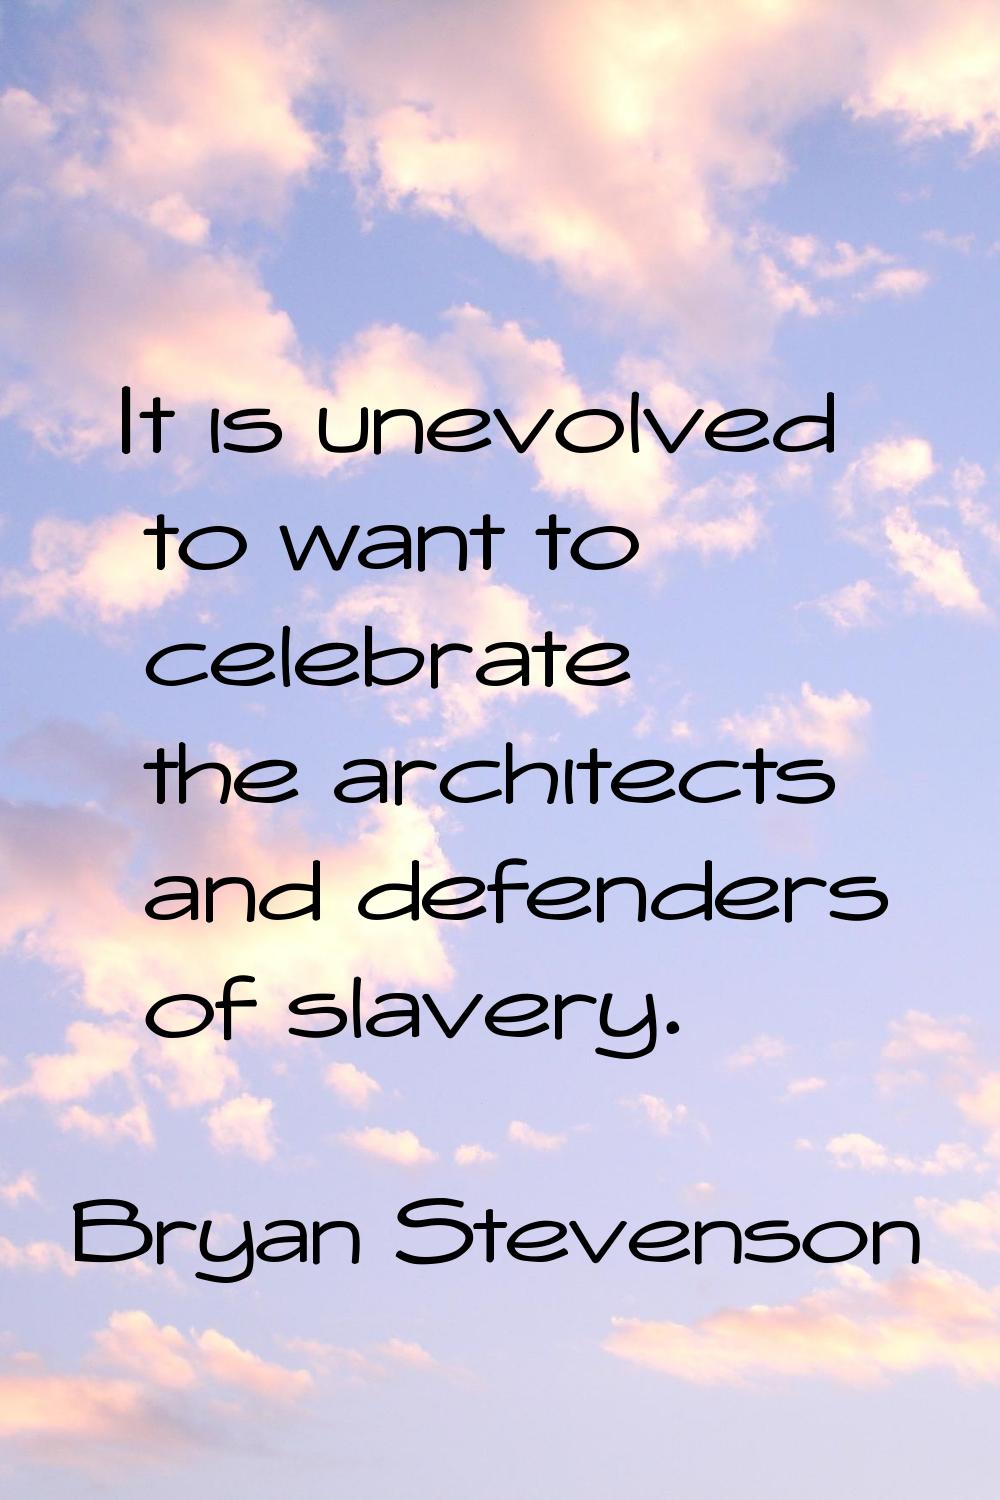 It is unevolved to want to celebrate the architects and defenders of slavery.